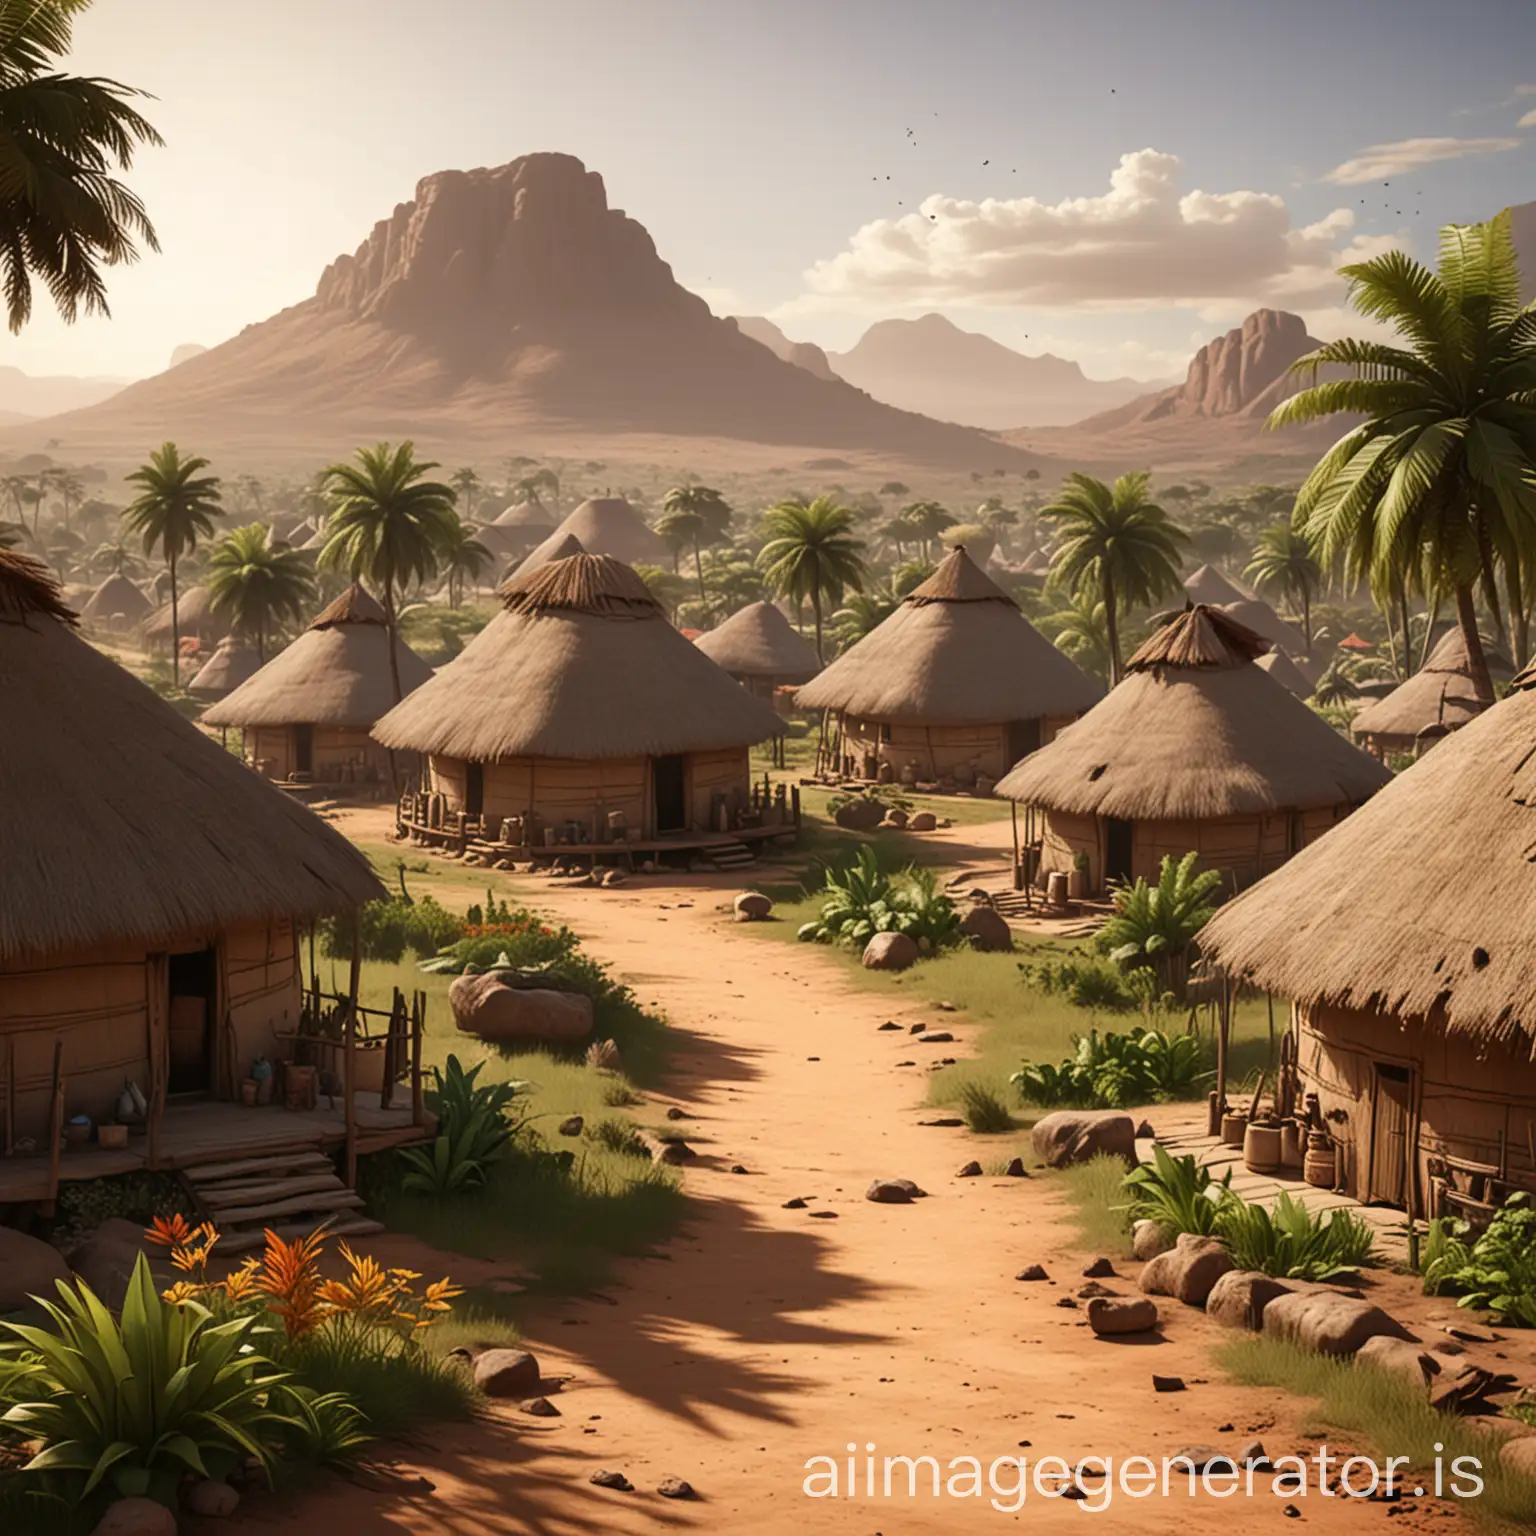 an animation of a peaceful African village with traditional huts and lush nature